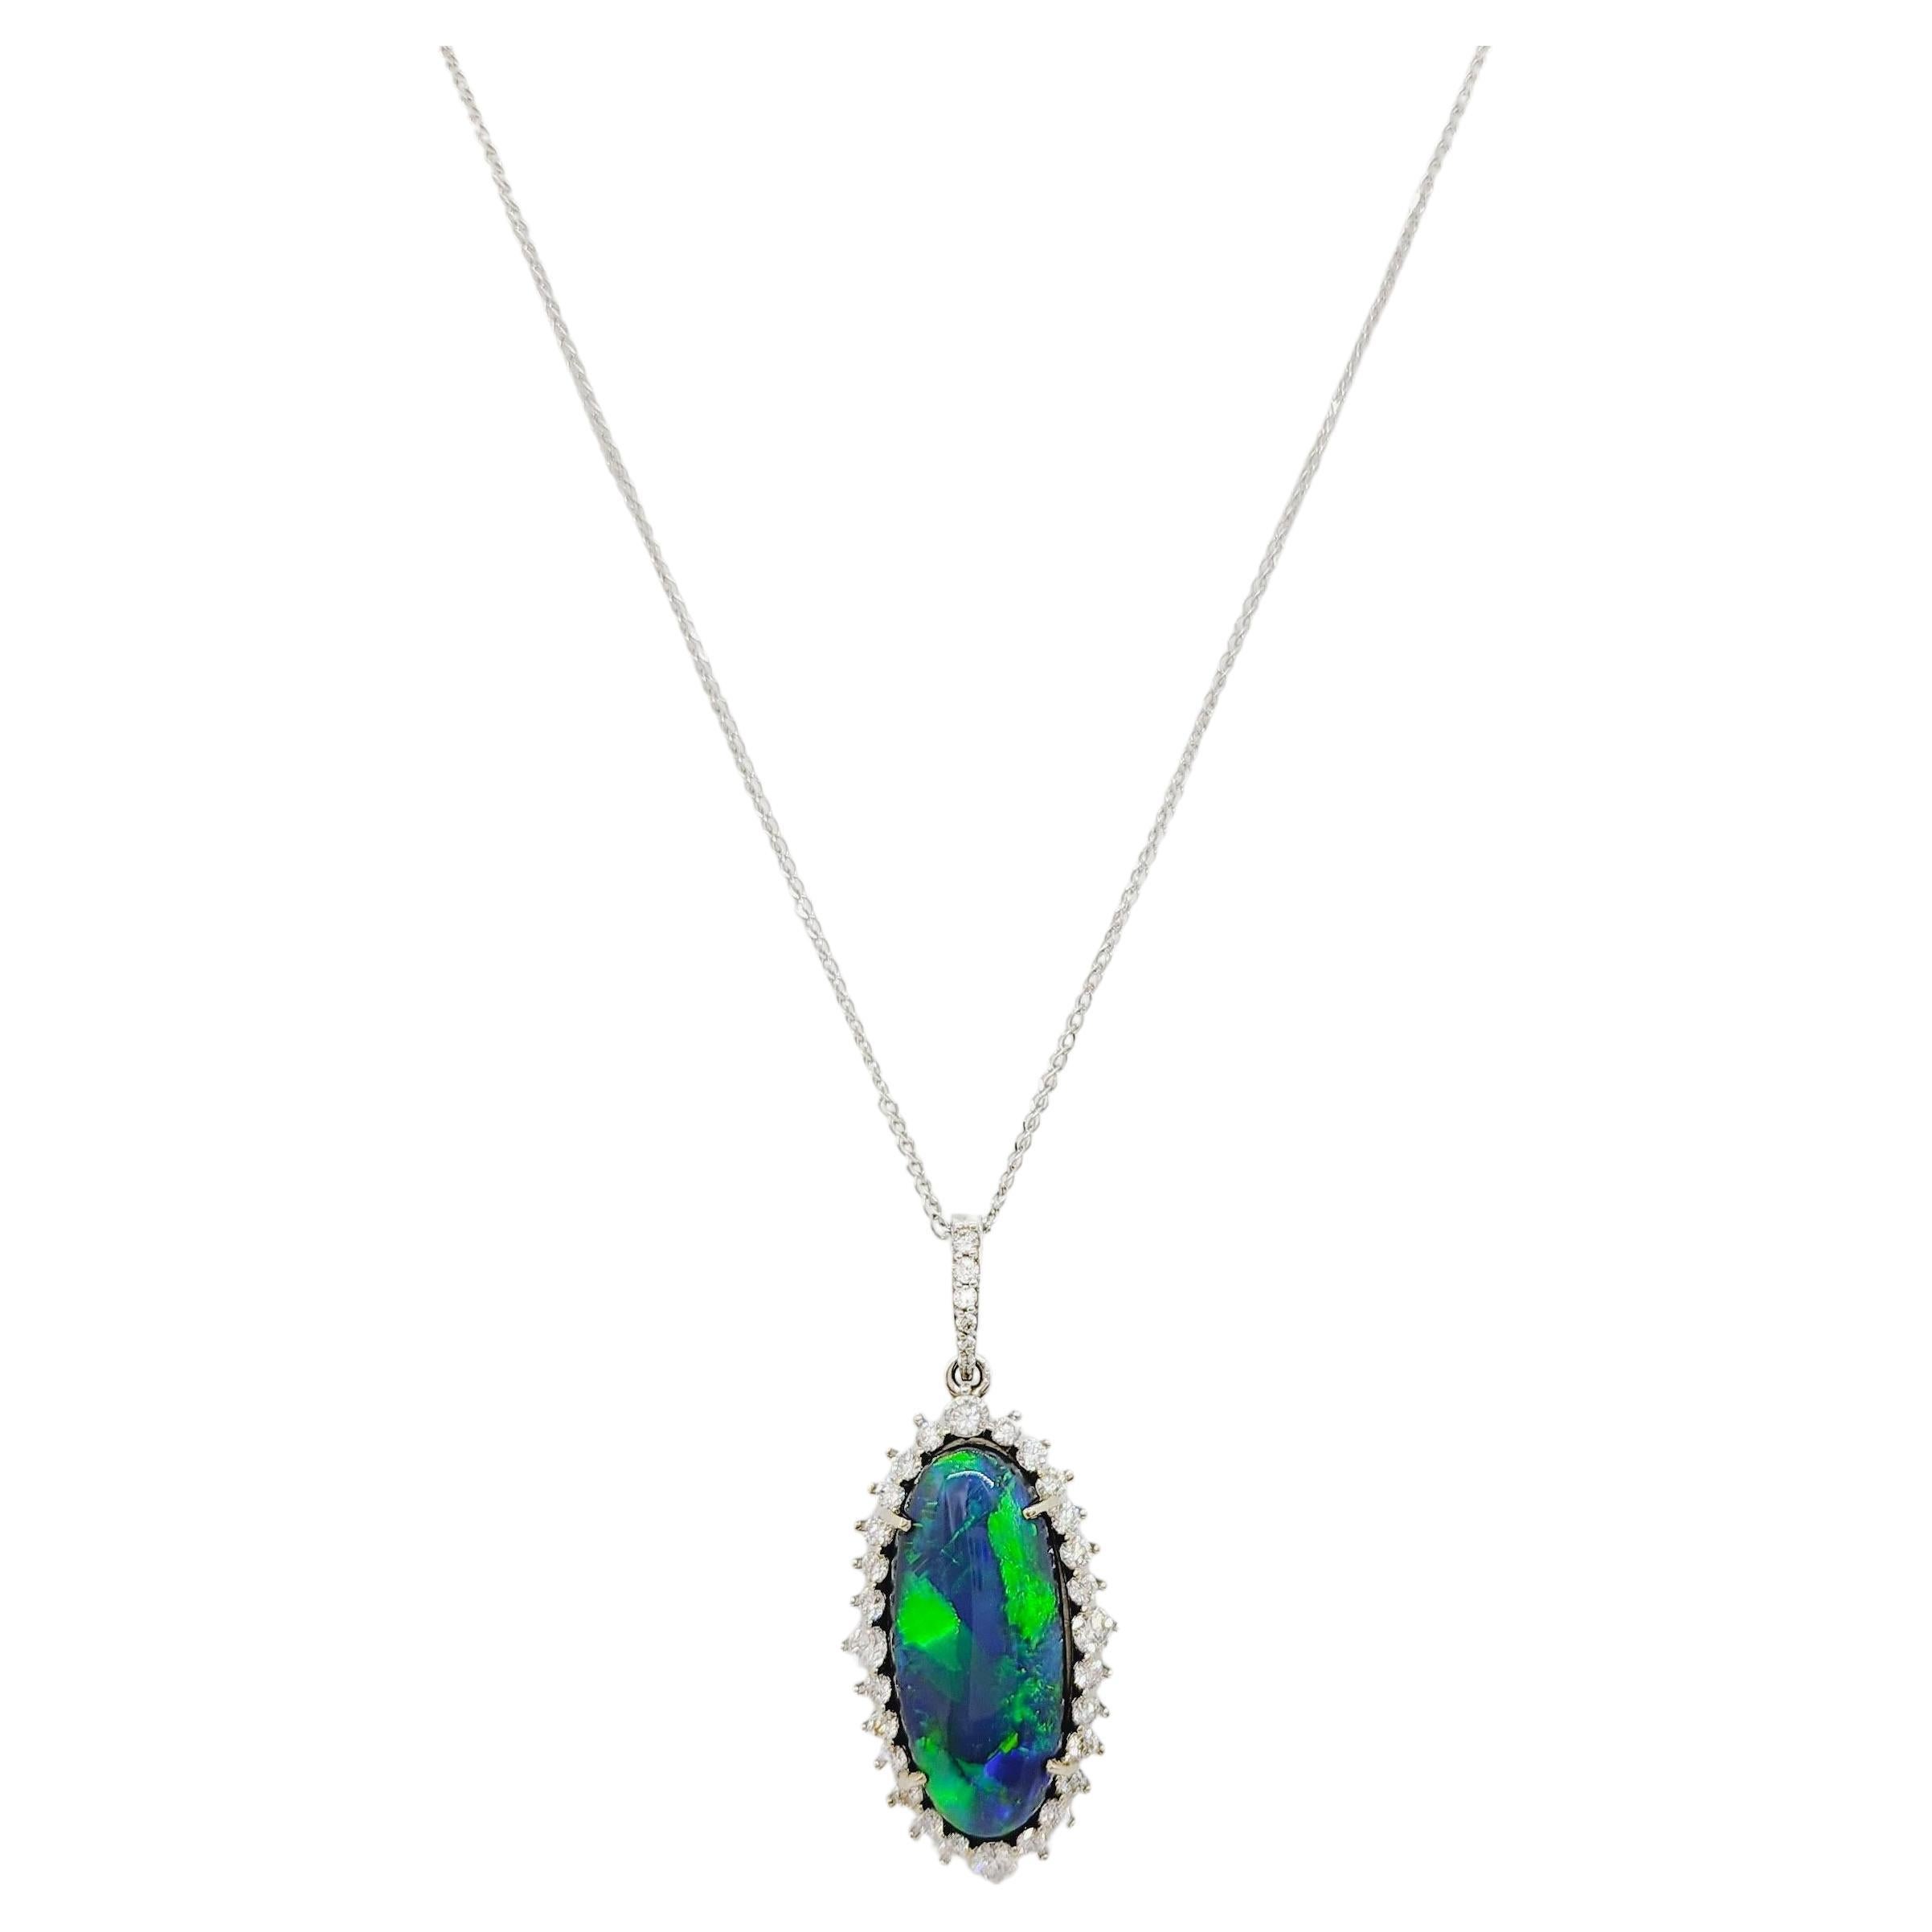 Black Opal Oval and Diamond Pendant Necklace in 18k White Gold